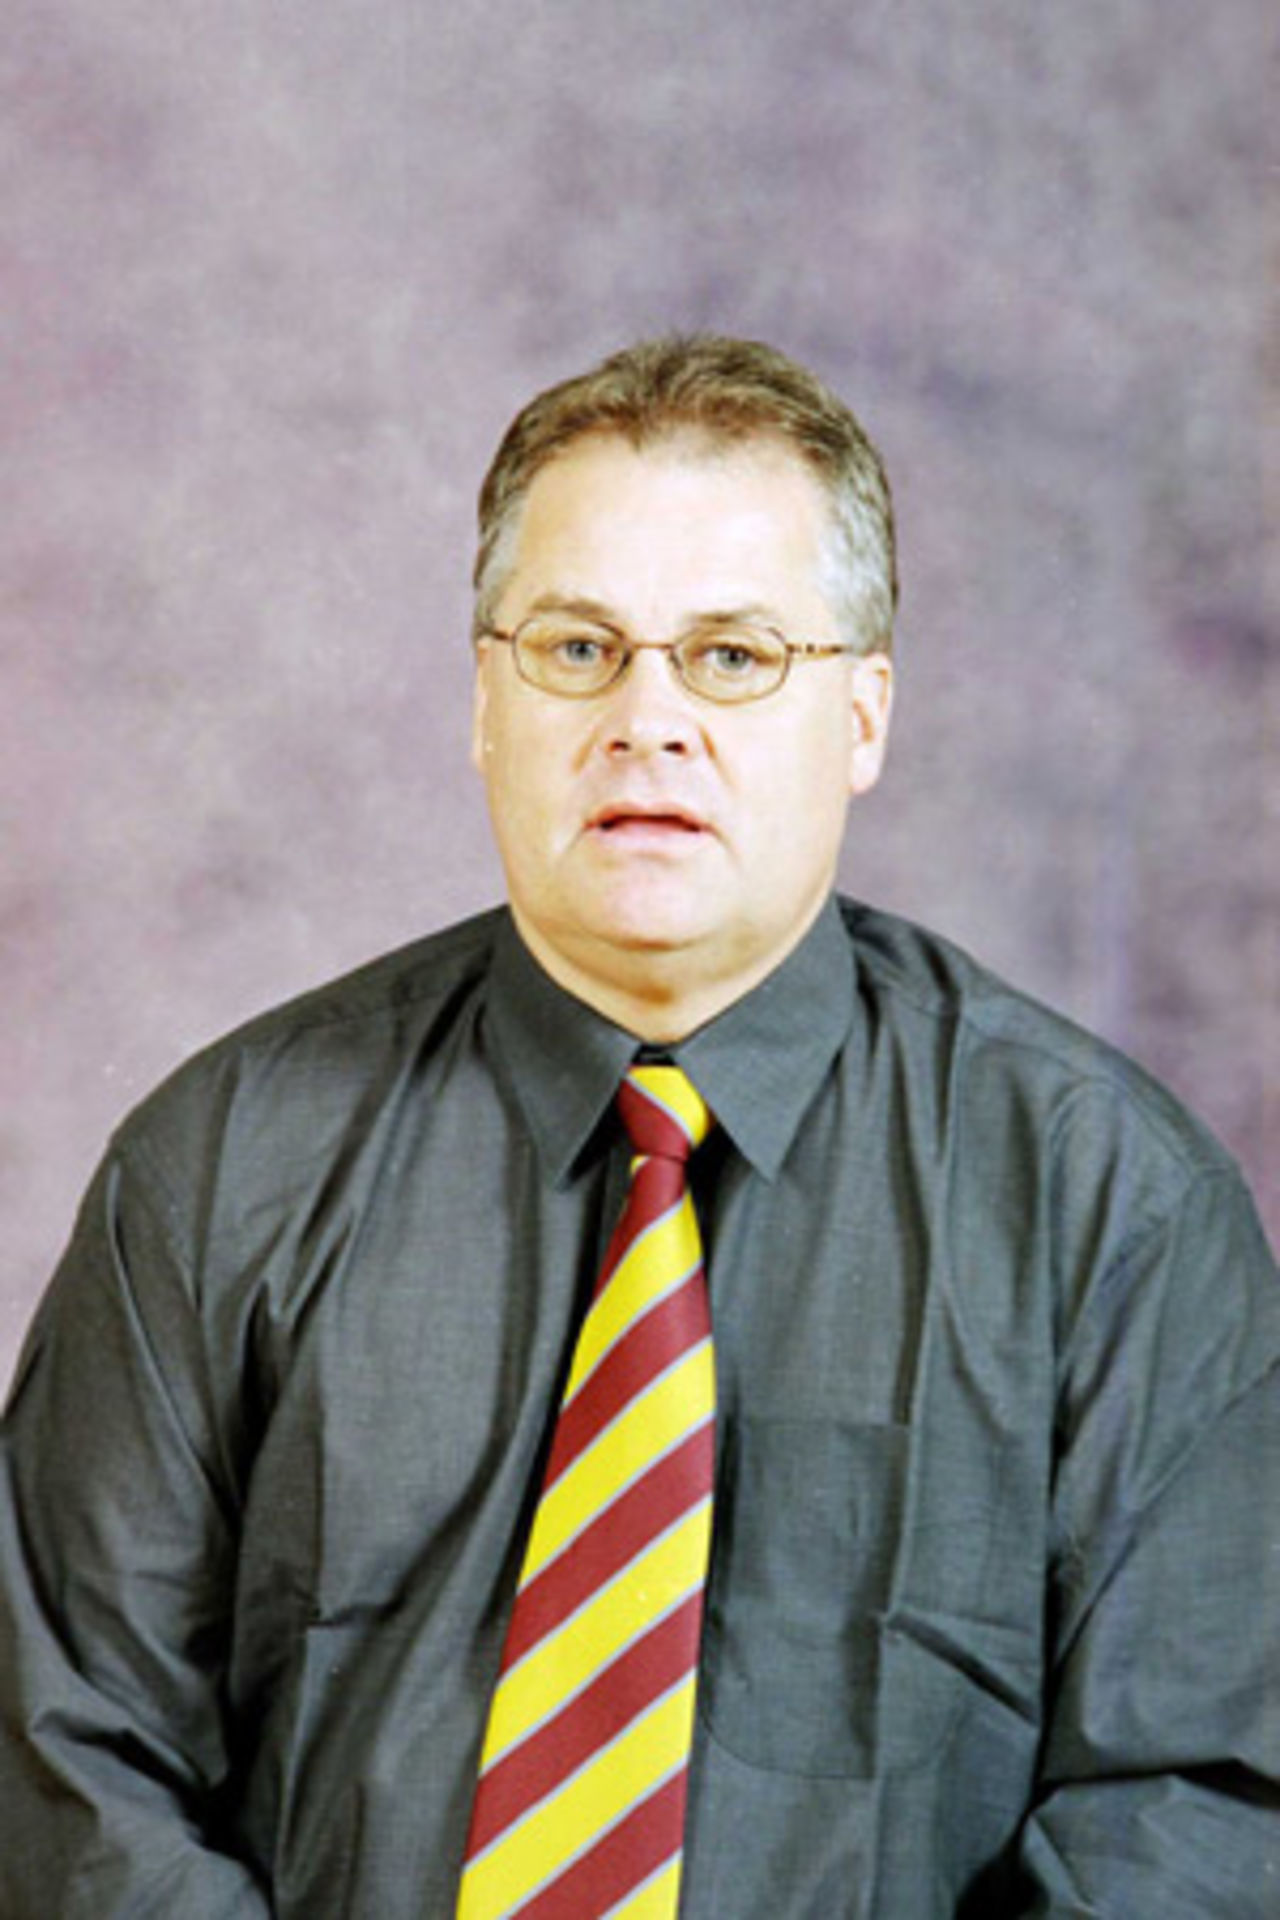 Portrait of Bruce Blair, Northern Districts coach in the 2001/02 season.